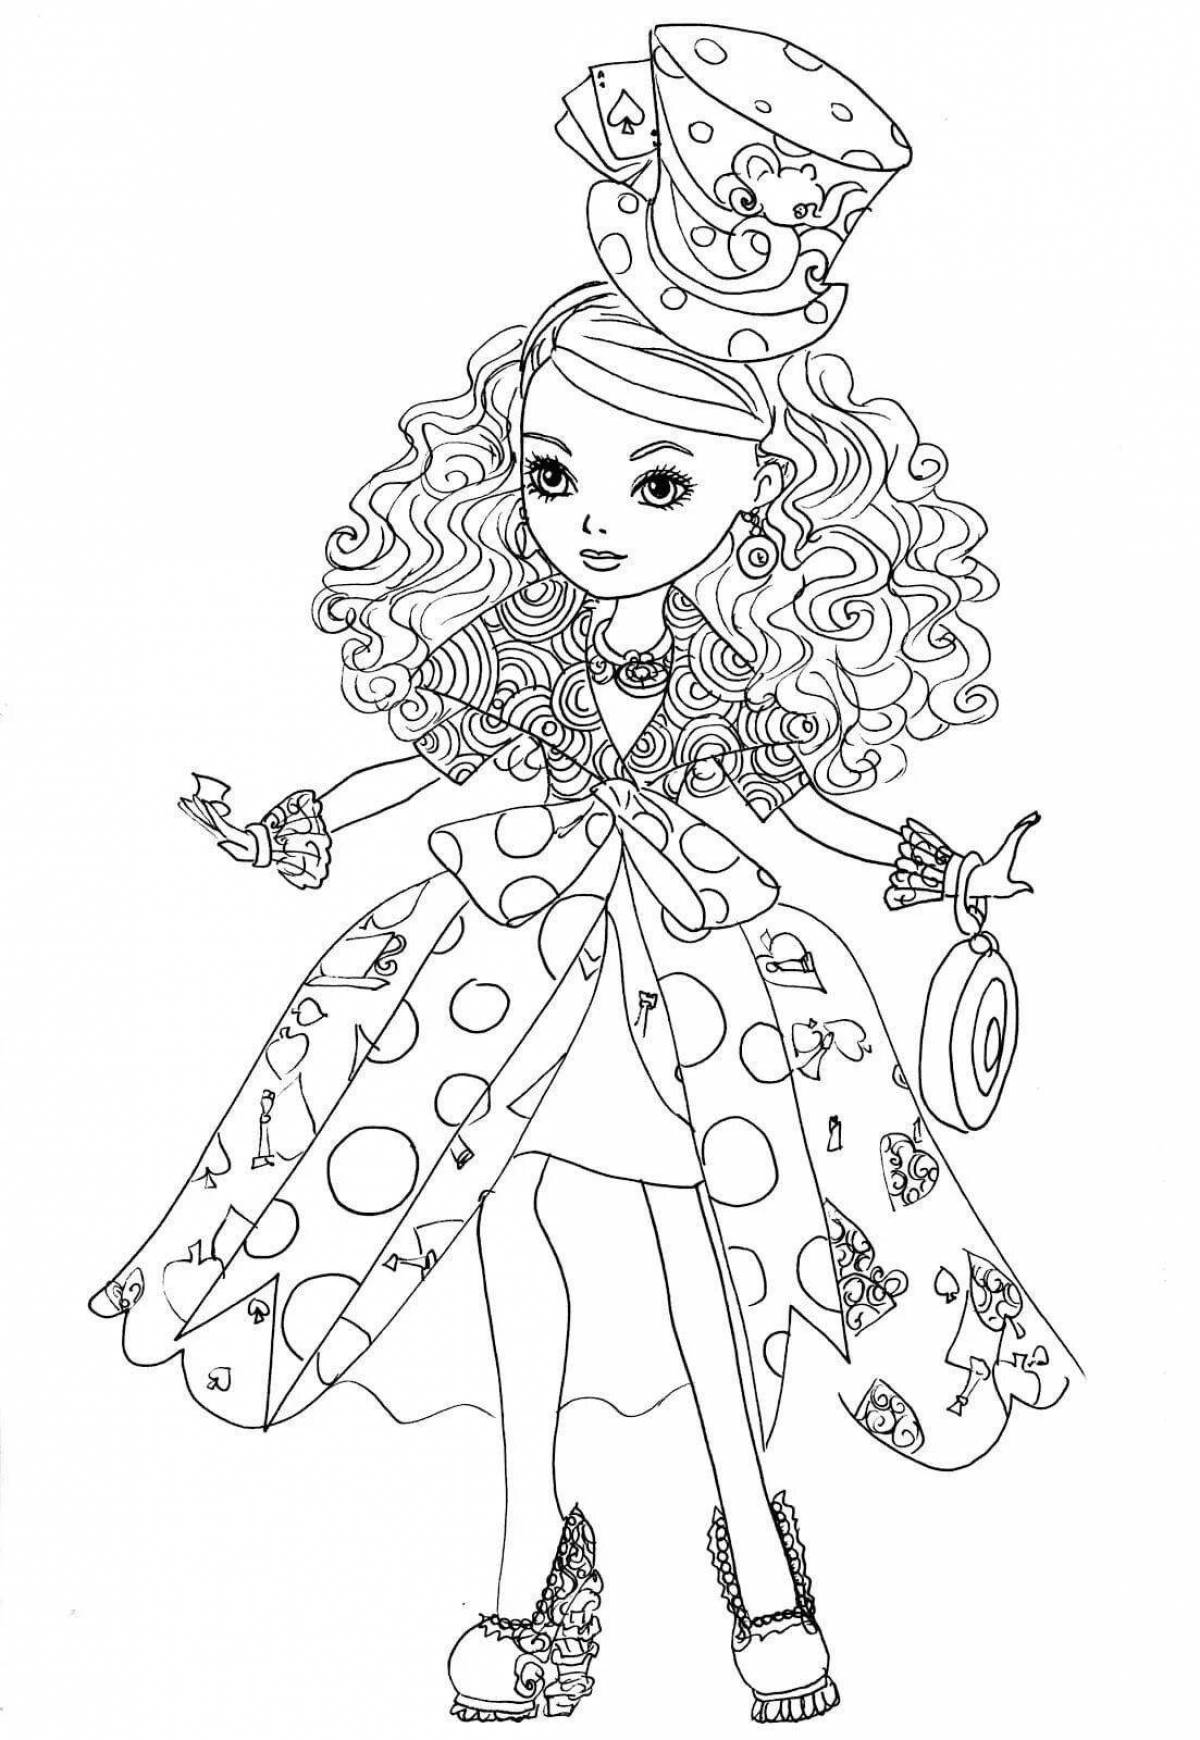 Coloring page adorable poppy doll